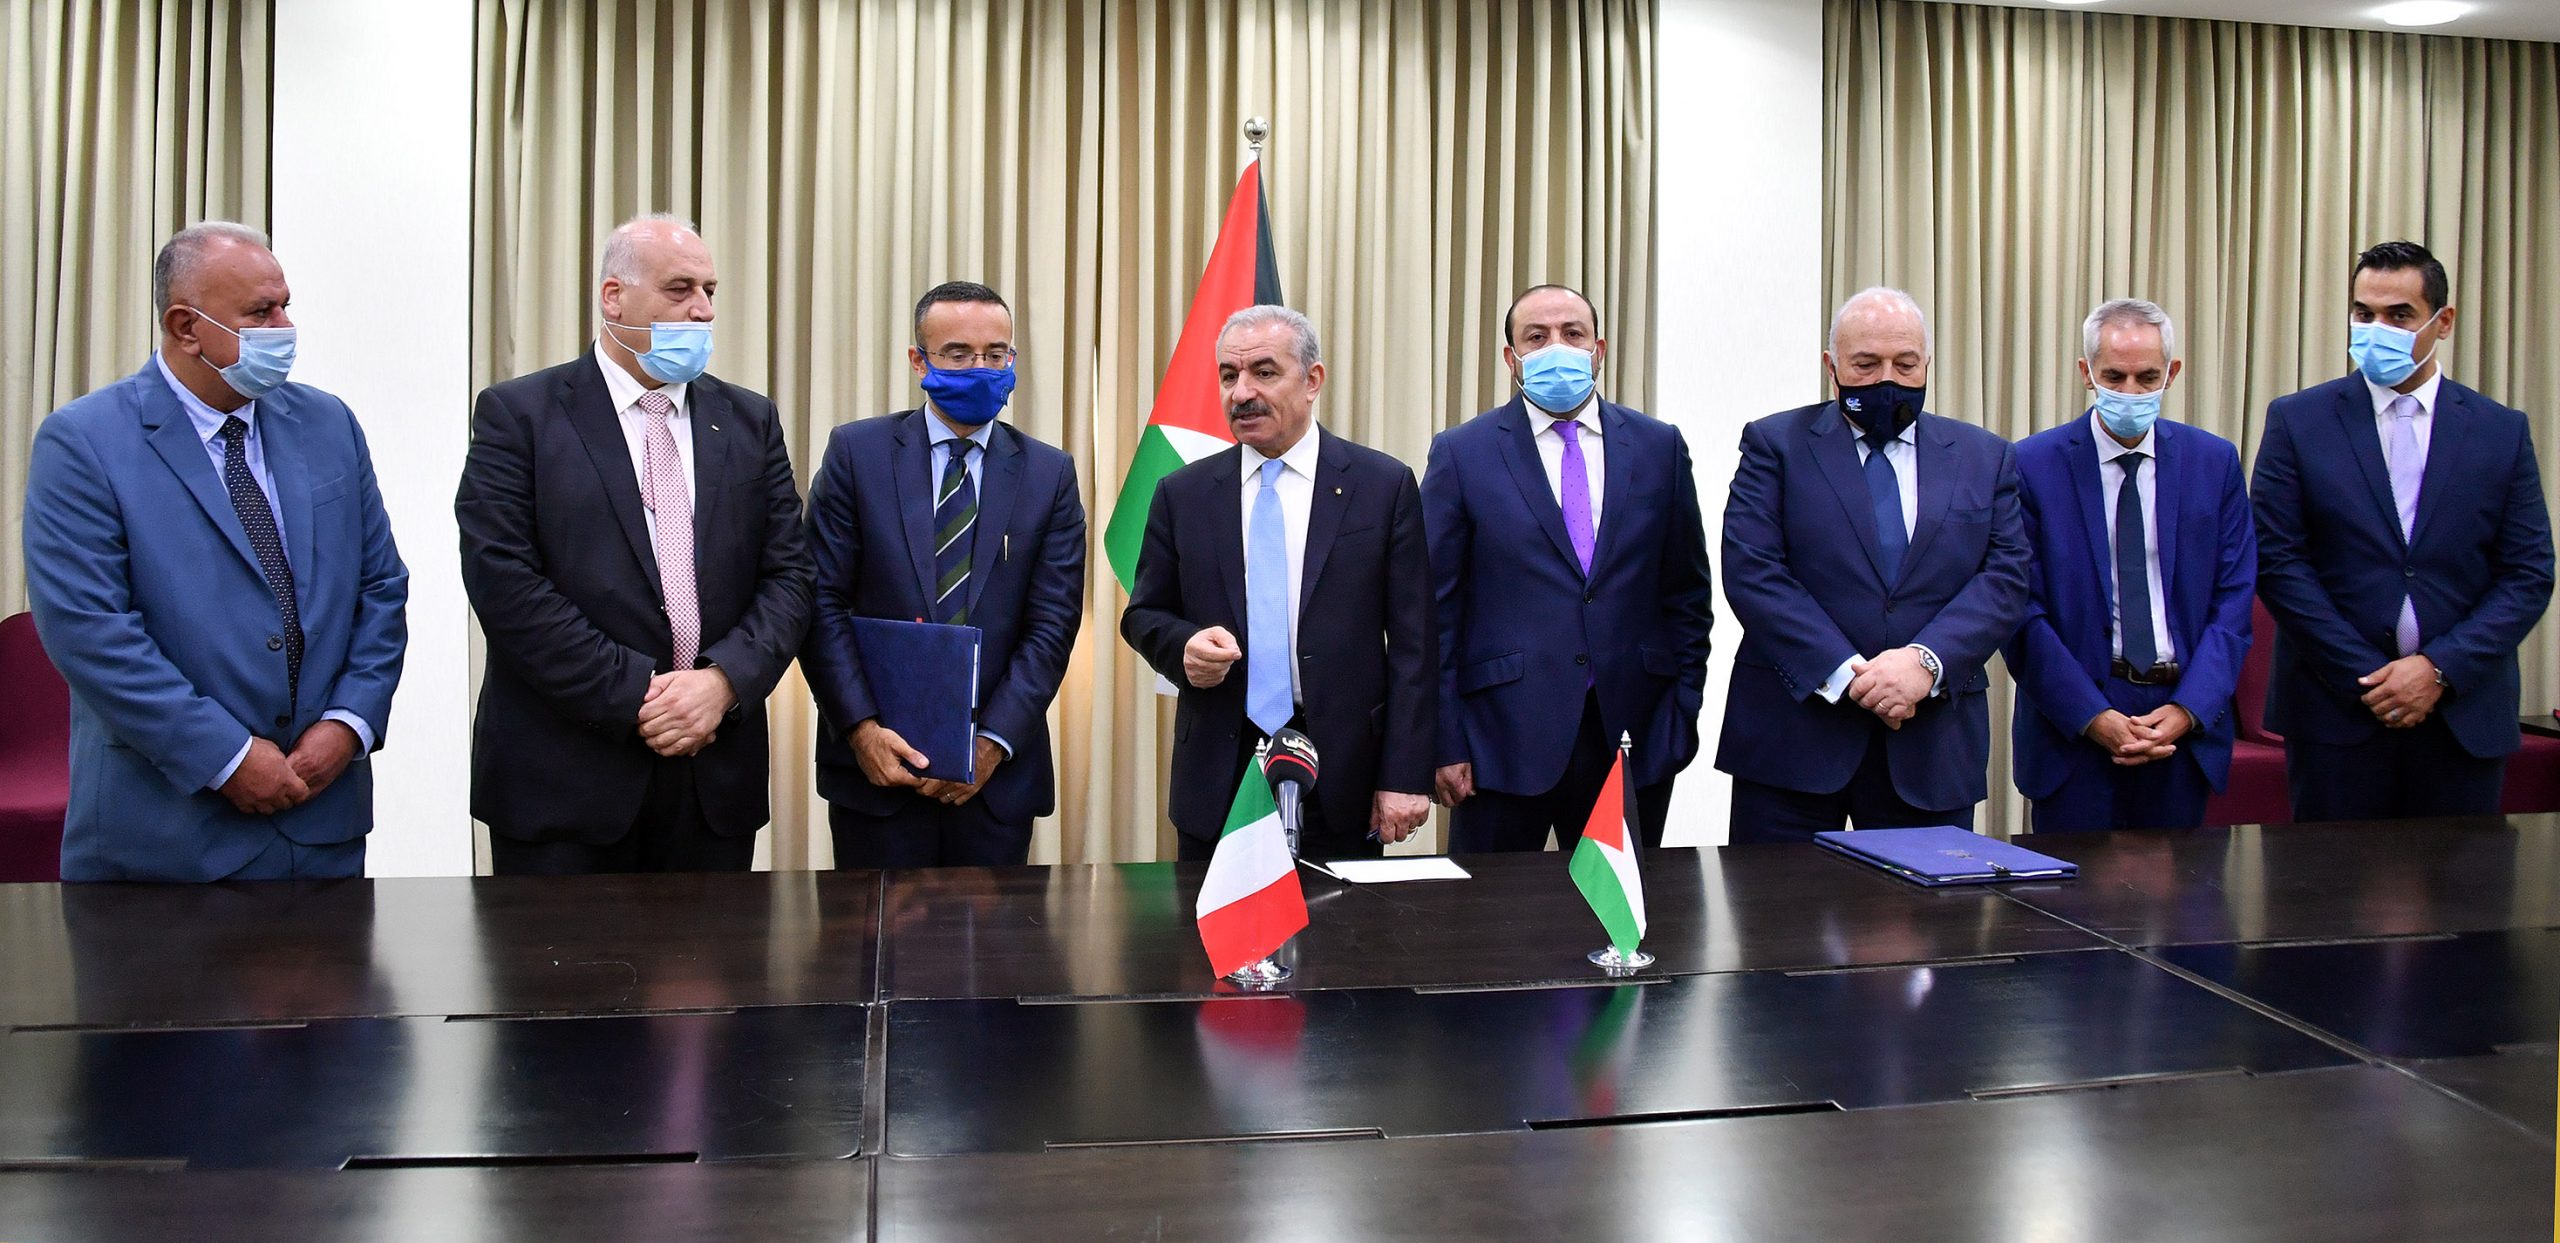 Italy pledges EUR 9 million in favor of Palestinian “Development”, “Labor” and “Prosecution”